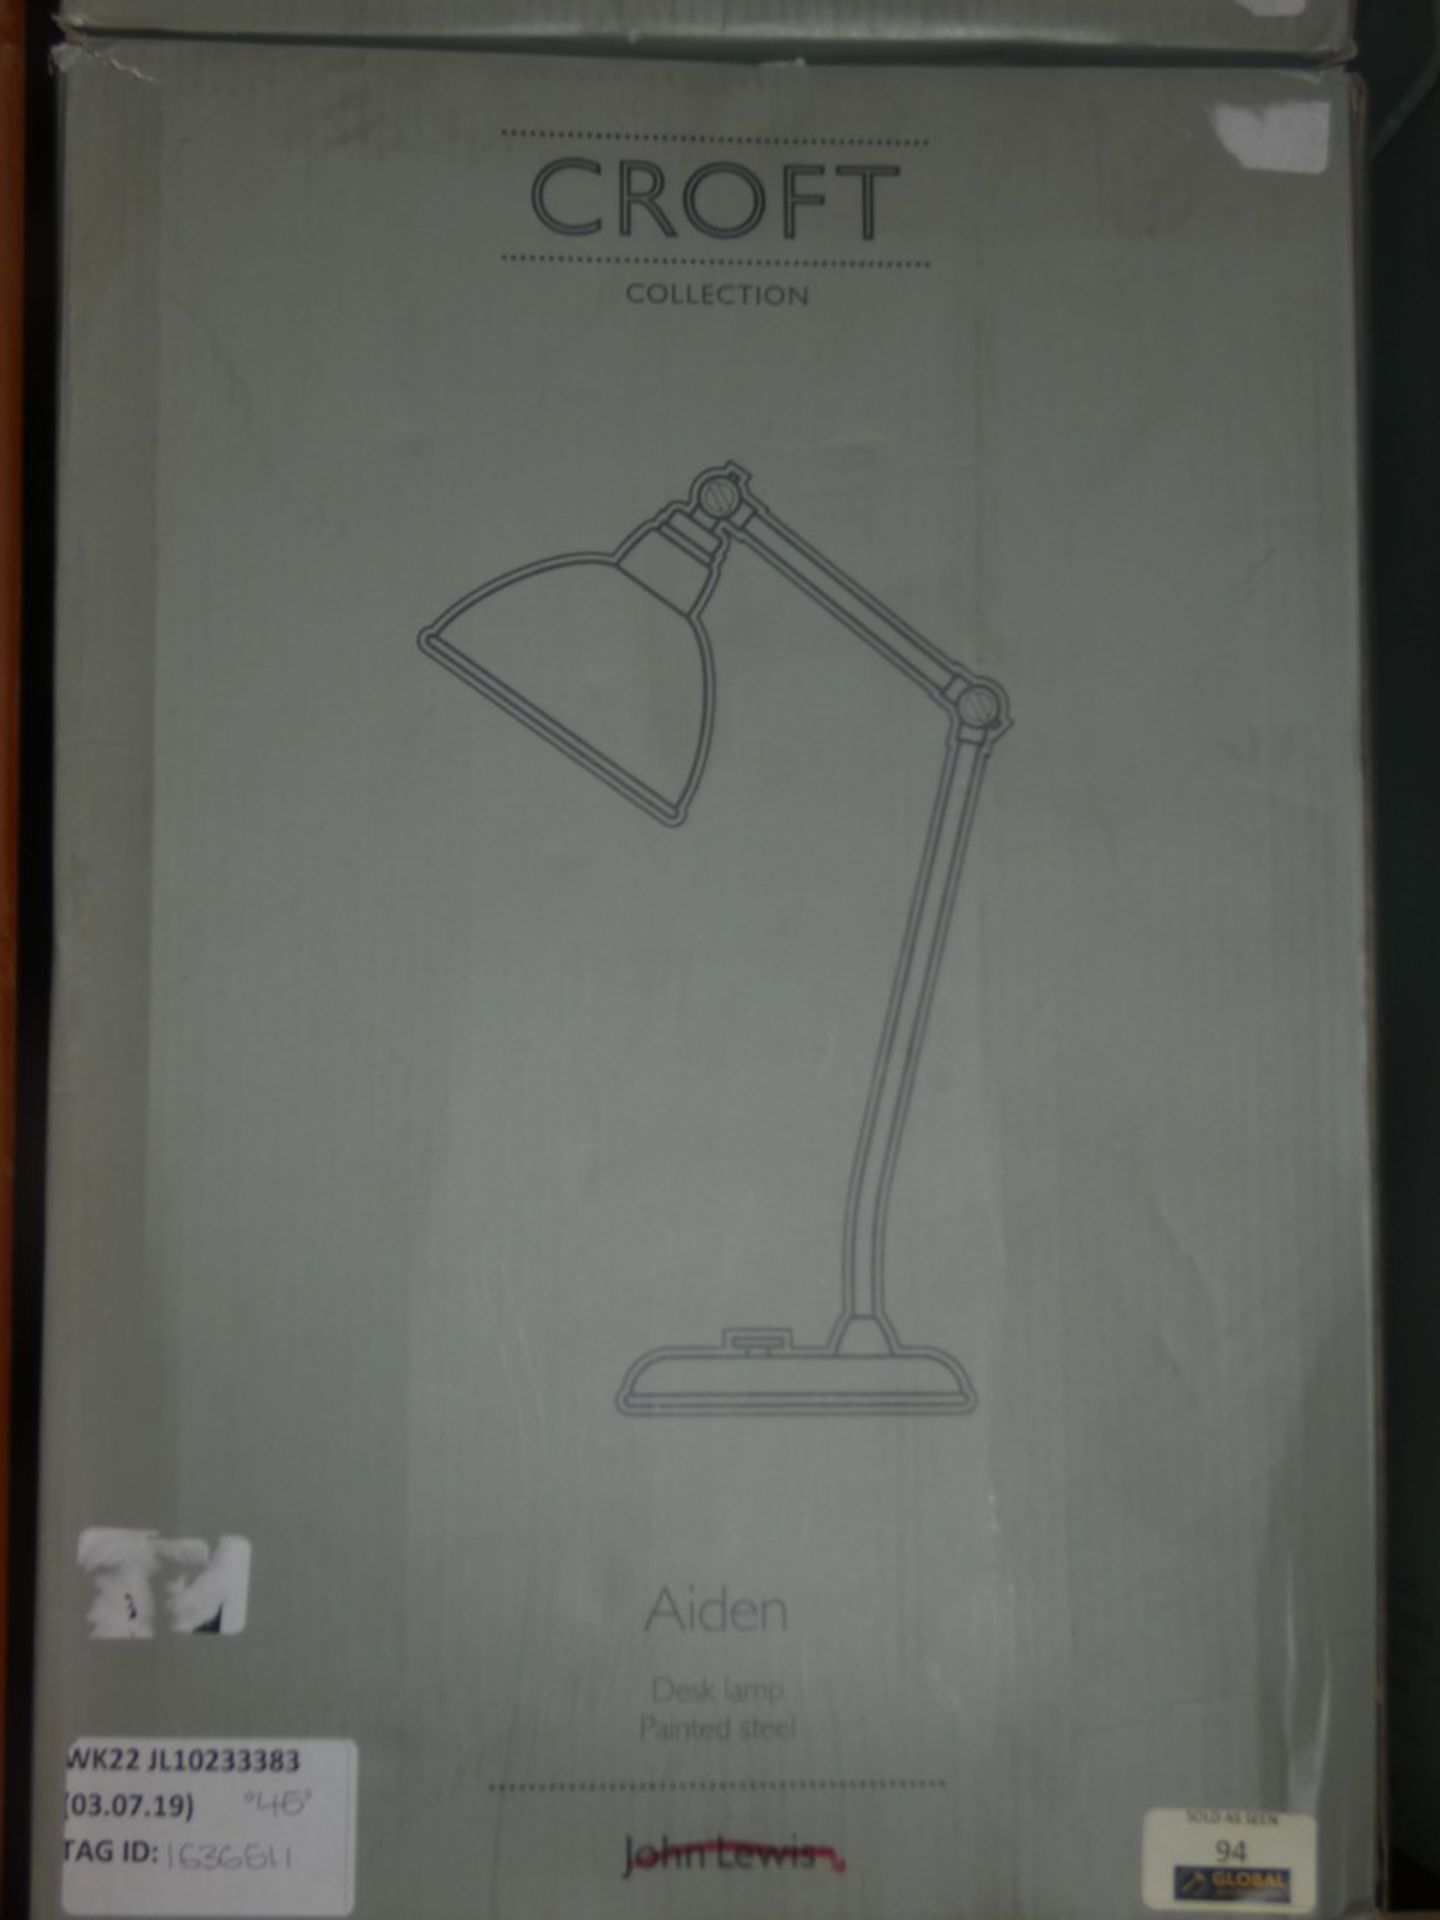 Boxed Croft Collection Aiden Painted Feel Desk Lamps RRP £65 Each (1636511) (1845697) (Viewings